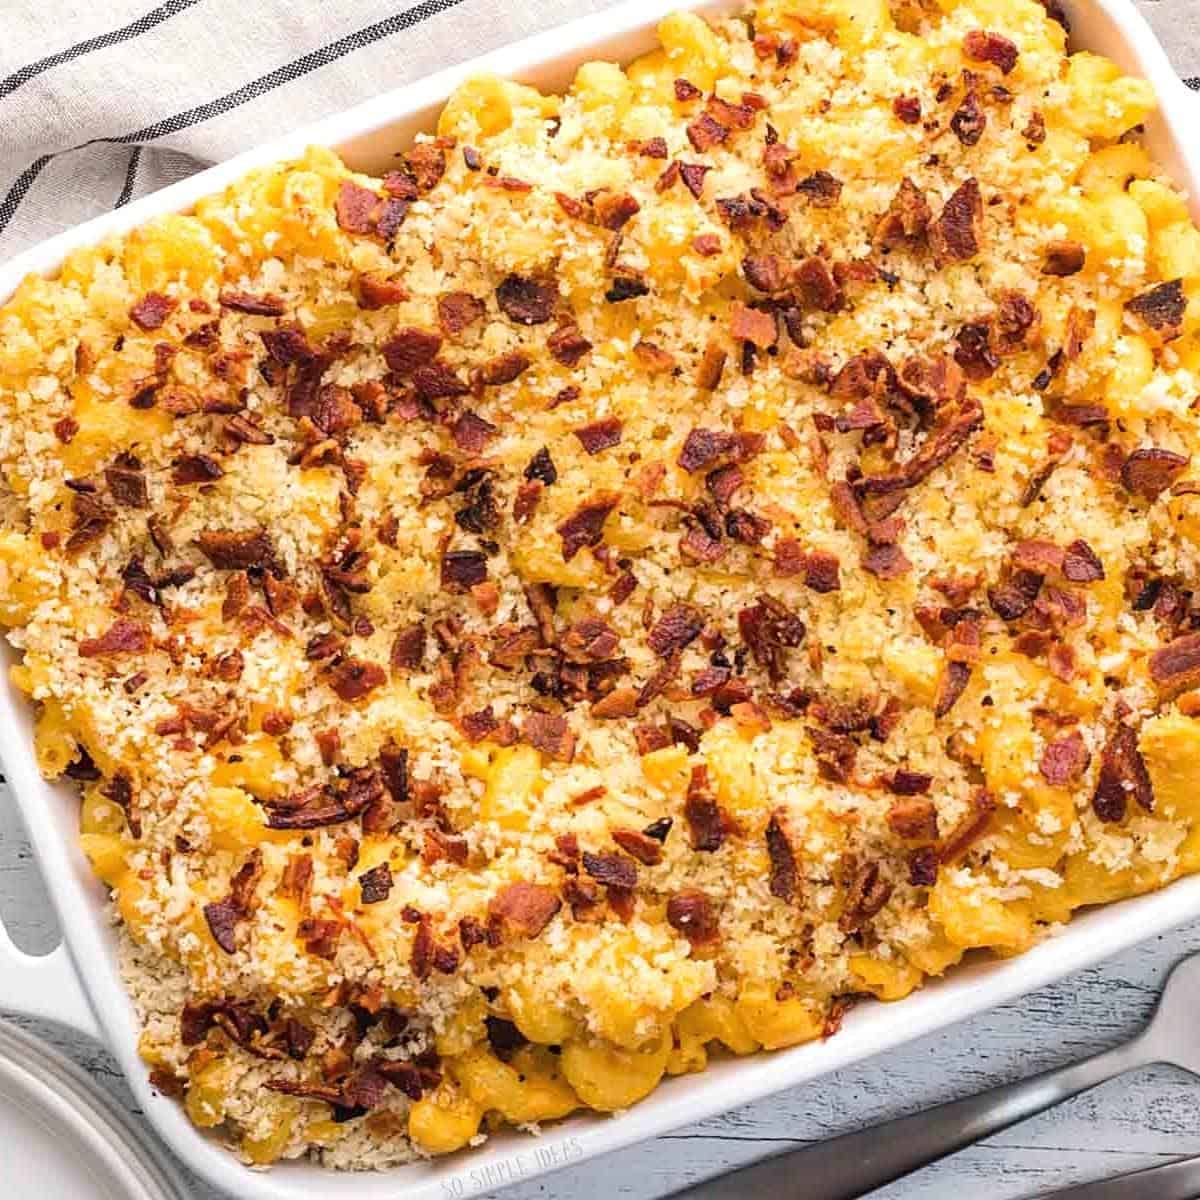 steakhouse mac and cheese featured image.